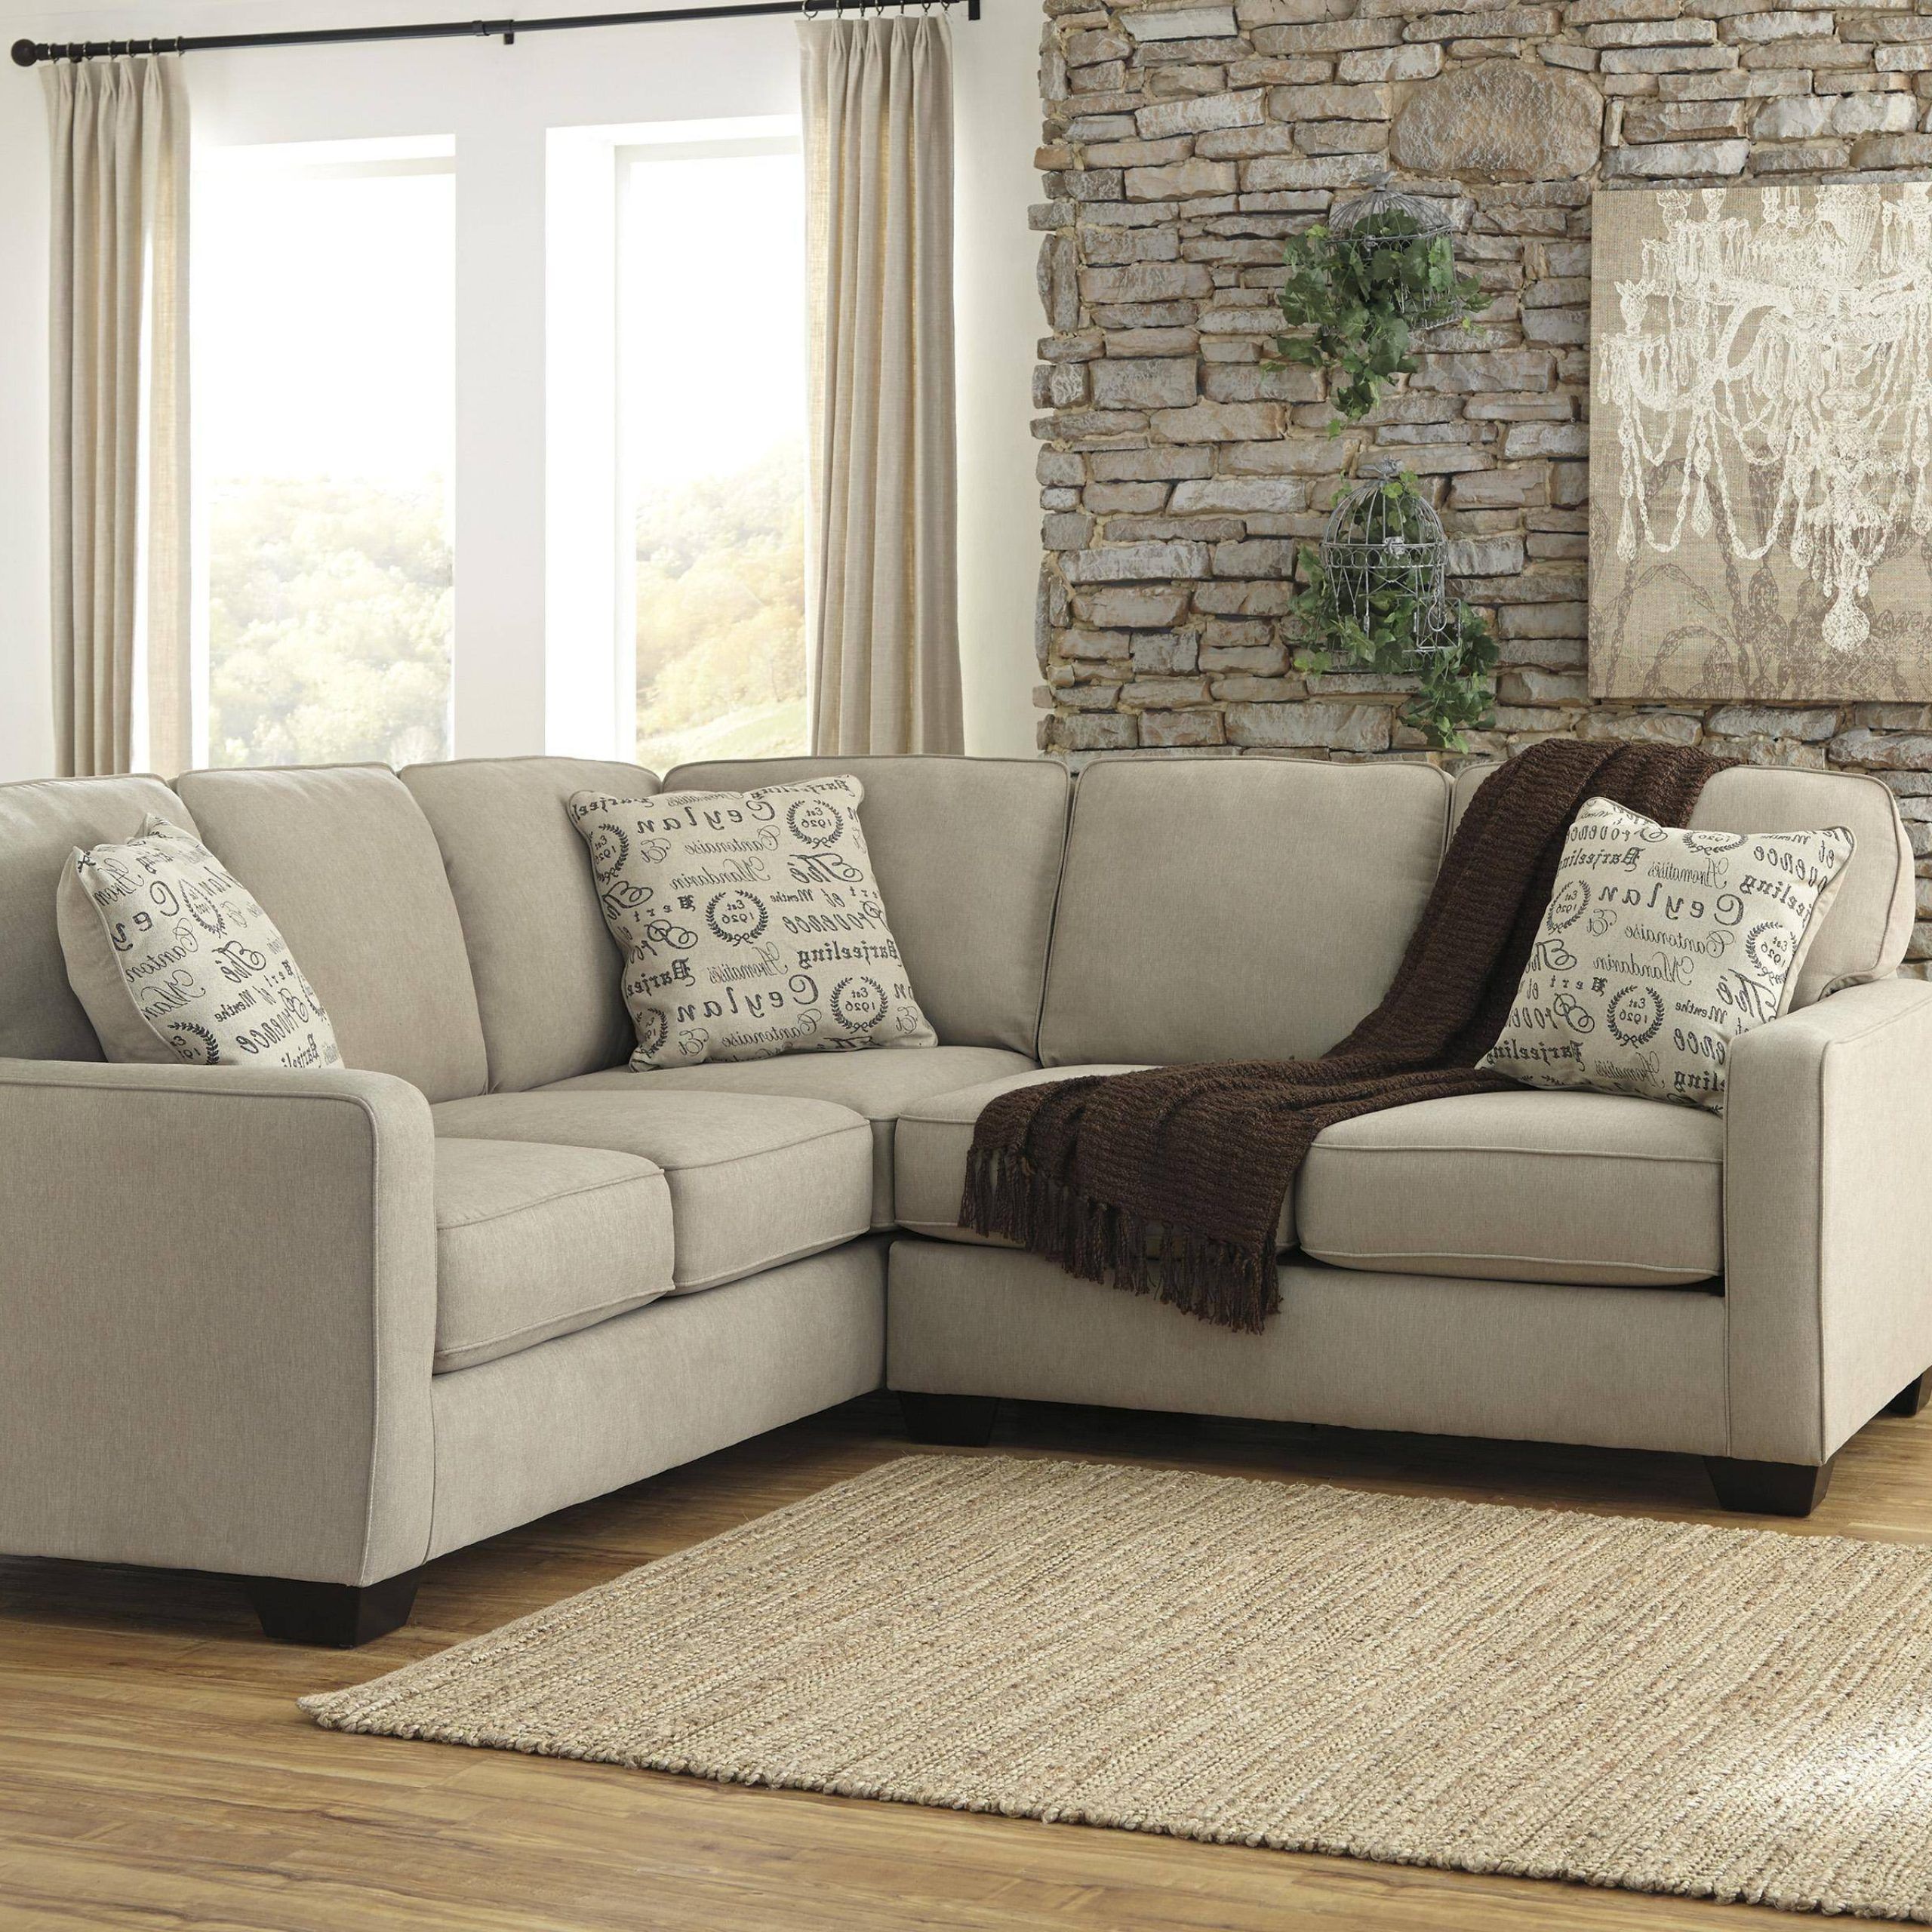 Buy Ashley Alenya Sectional Sofa Left Hand Chase In Quartz, Linen Online For Small L Shaped Sectional Sofas In Beige (View 13 of 20)